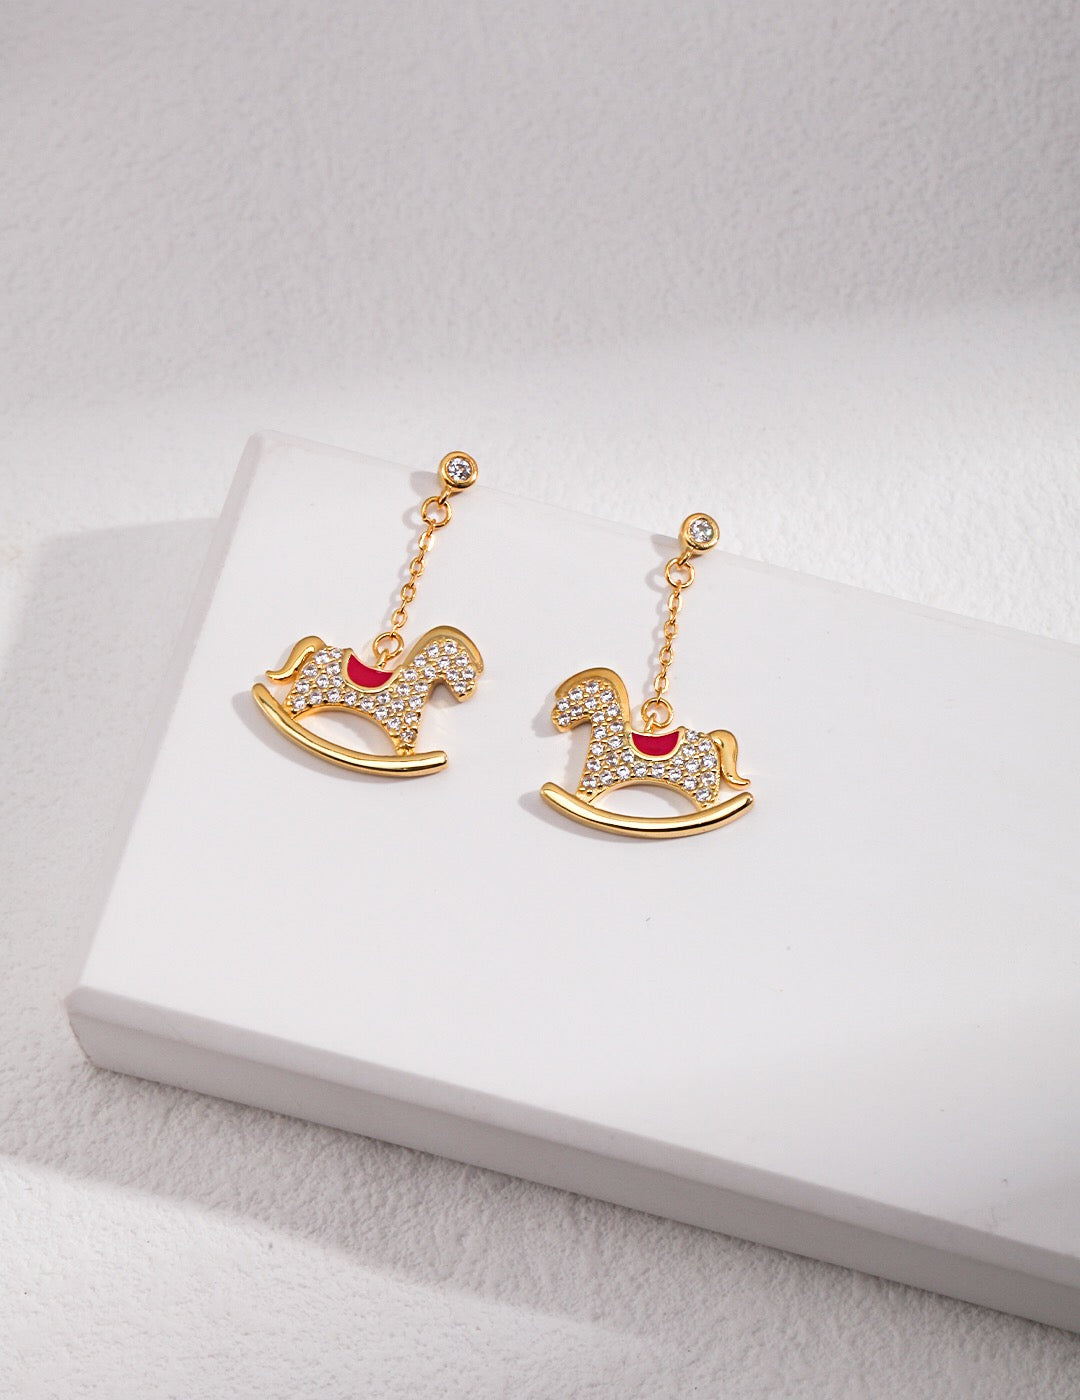 All the Happiness – Rocking Horse Earrings